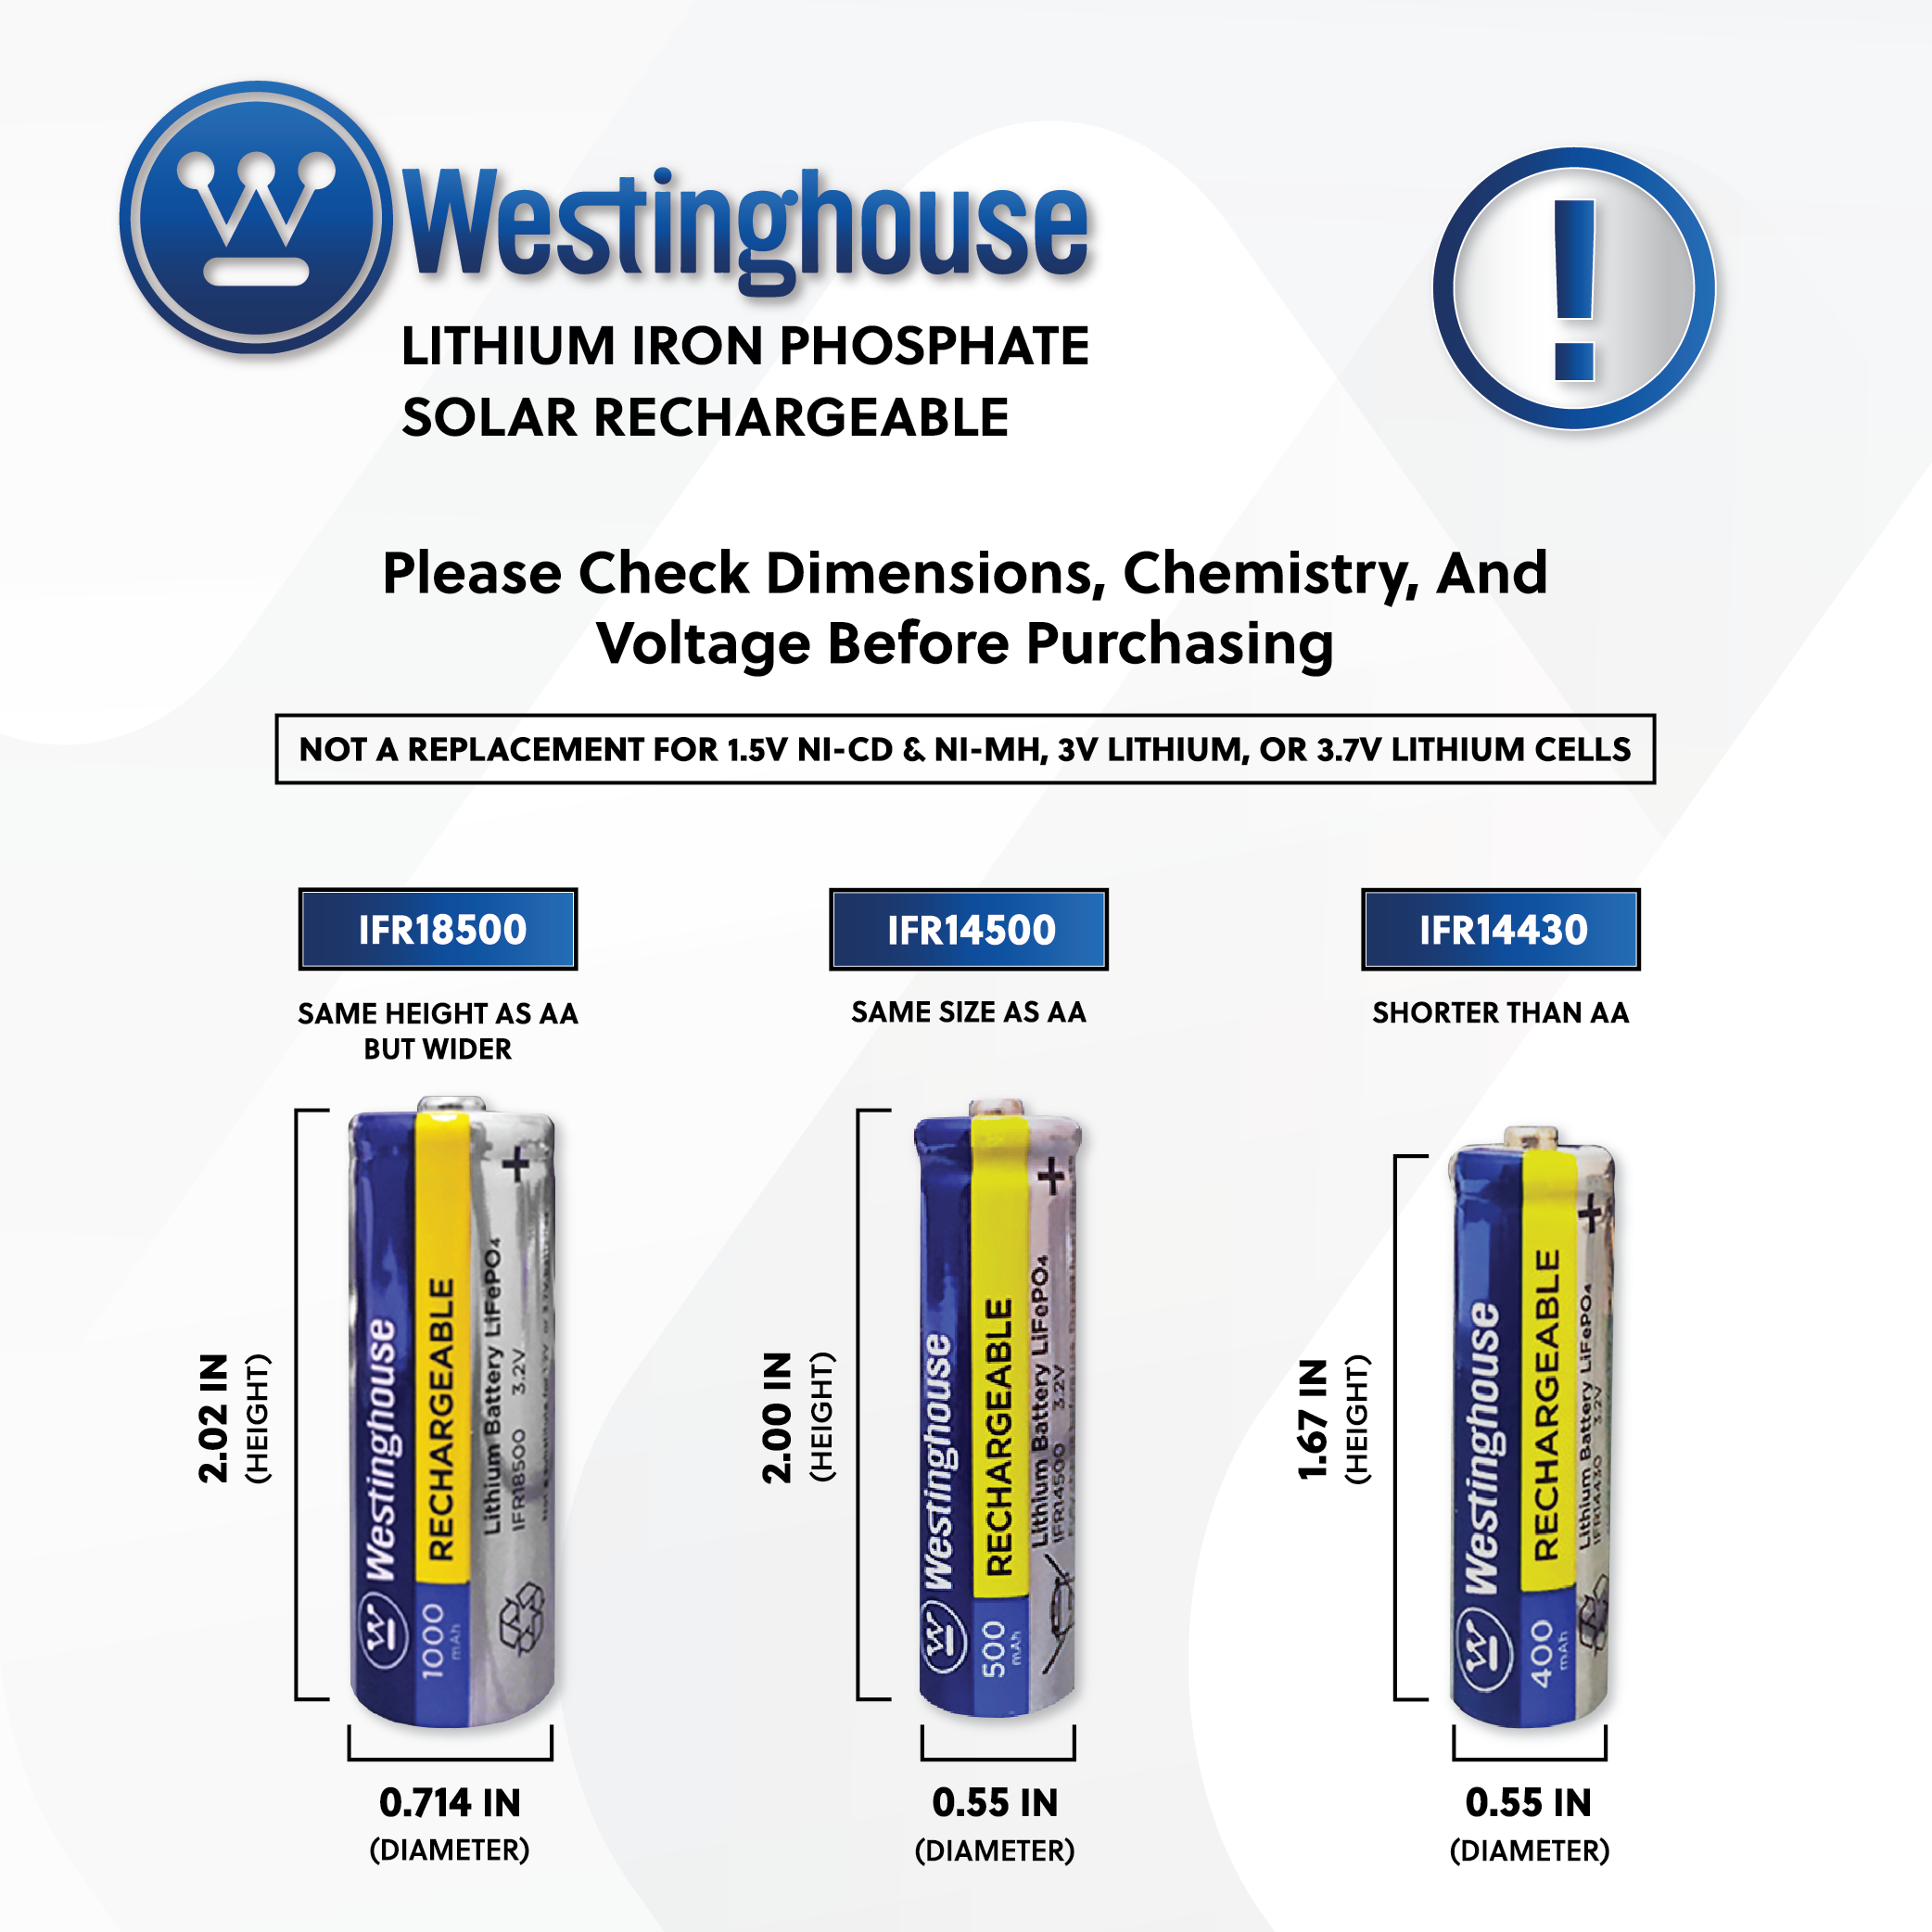 Westinghouse Lithium Iron Phosphate IFR14430 3.2v 400mah Solar Rechargeable Cardboard Box of 8